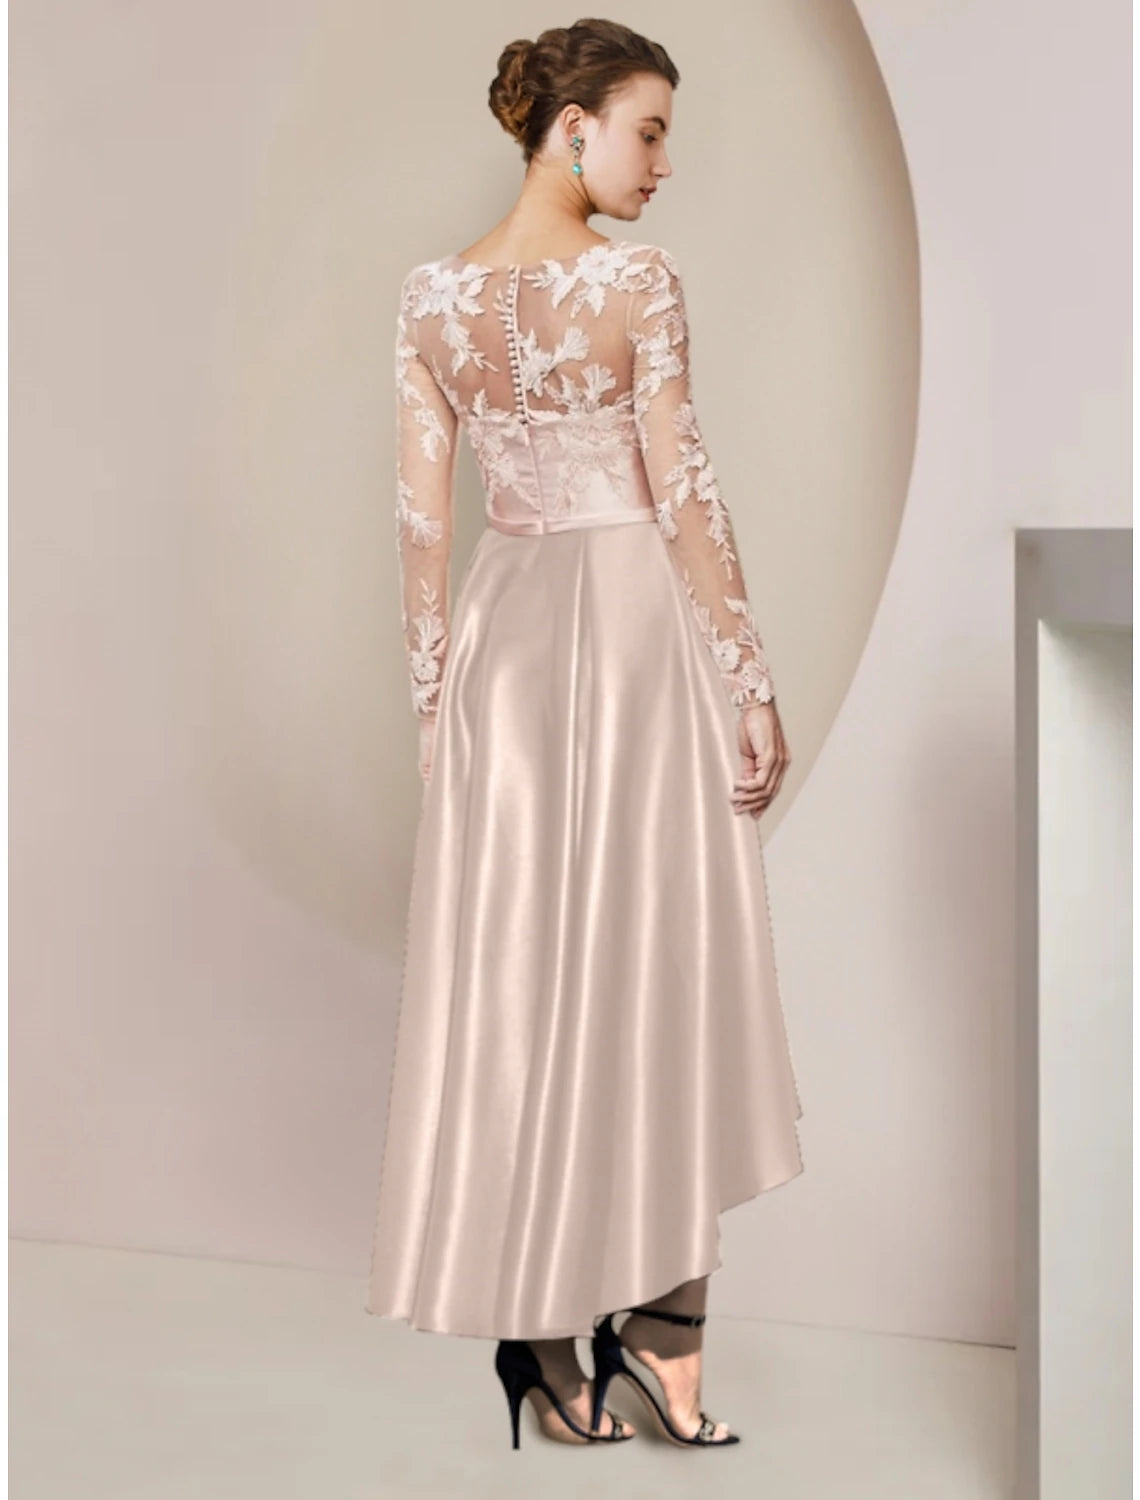 Sheath / Column Mother of the Bride Dress Wedding Guest Elegant Party V Neck Asymmetrical Ankle Length Satin Long Sleeve with Lace Pleats